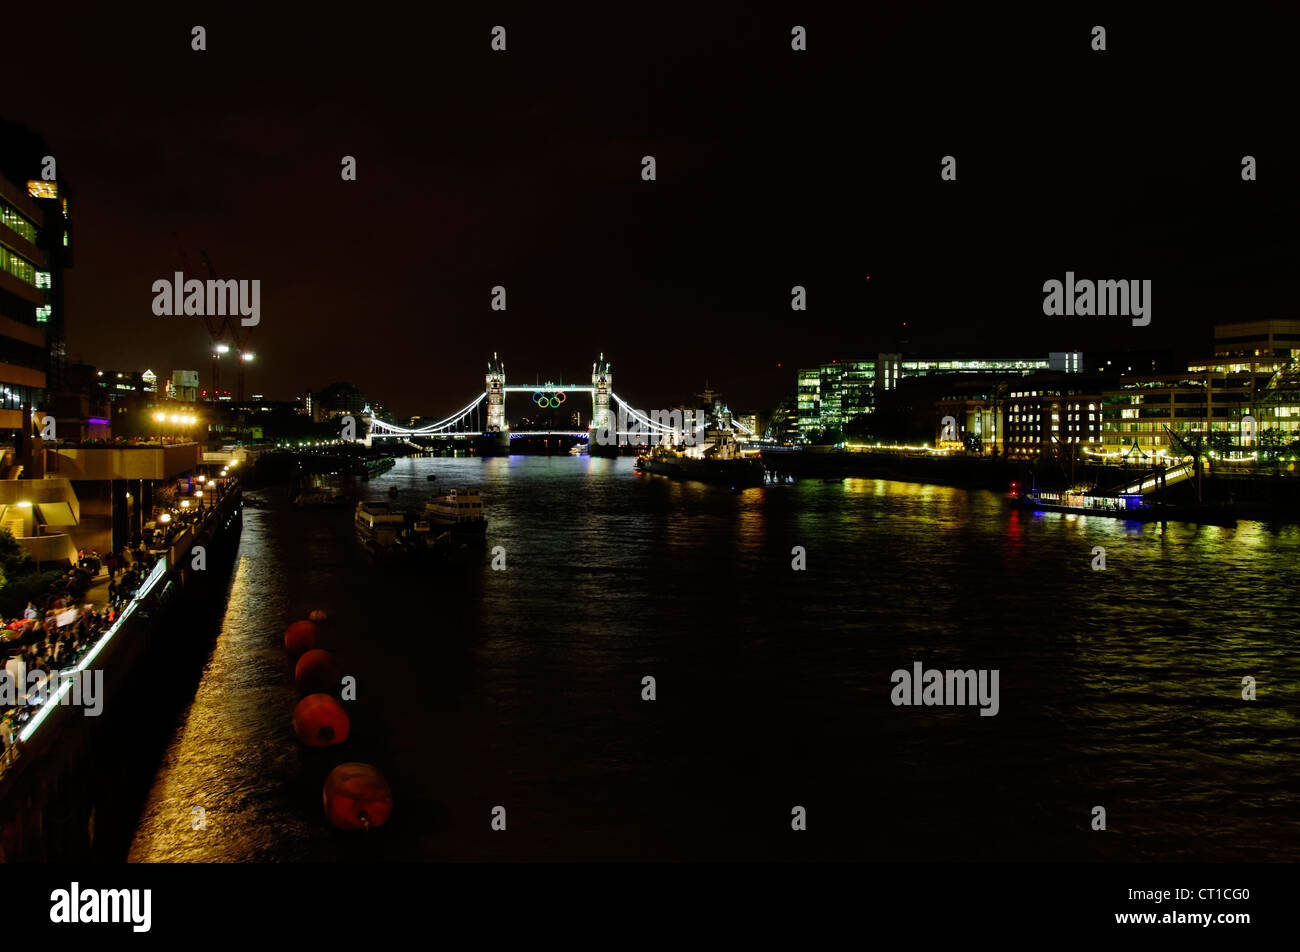 LONDON, UK - JULY 5, 2012: Olympic rings suspended on Tower Bridge in London, night photography. Stock Photo